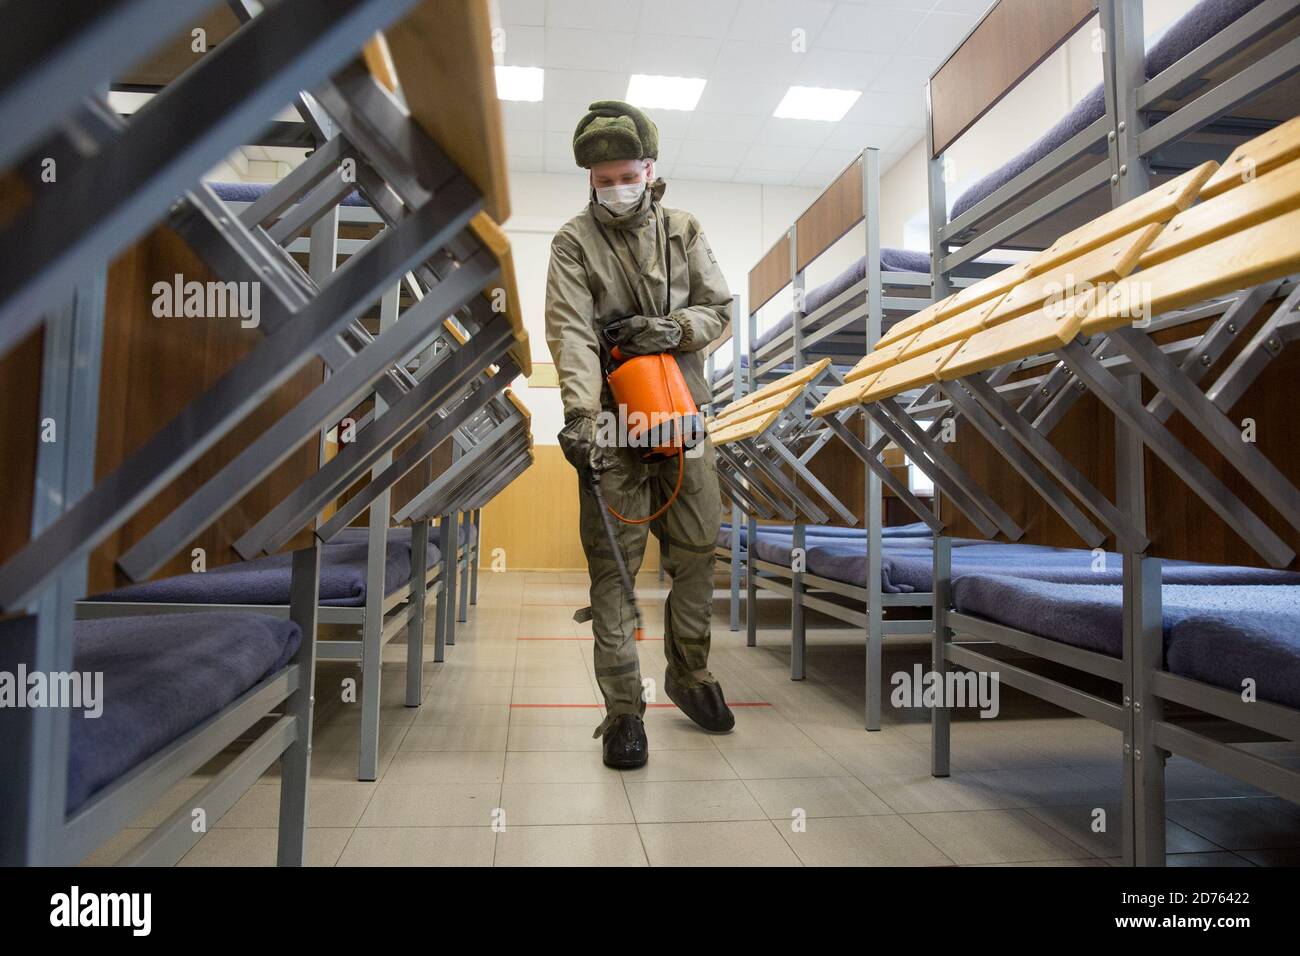 St. Petersburg, Russia. 20th Oct, 2020. A staff member disinfects an army recruitment center in St. Petersburg, Russia, Oct. 20, 2020. Russia's ongoing autumn army recruitment started on Oct. 1 and will last until Dec. 31. In order to be conscripted, candidates must be Russian citizens aged between 18 and 27, and pass a physical examination. Credit: Irina Motina/Xinhua/Alamy Live News Stock Photo